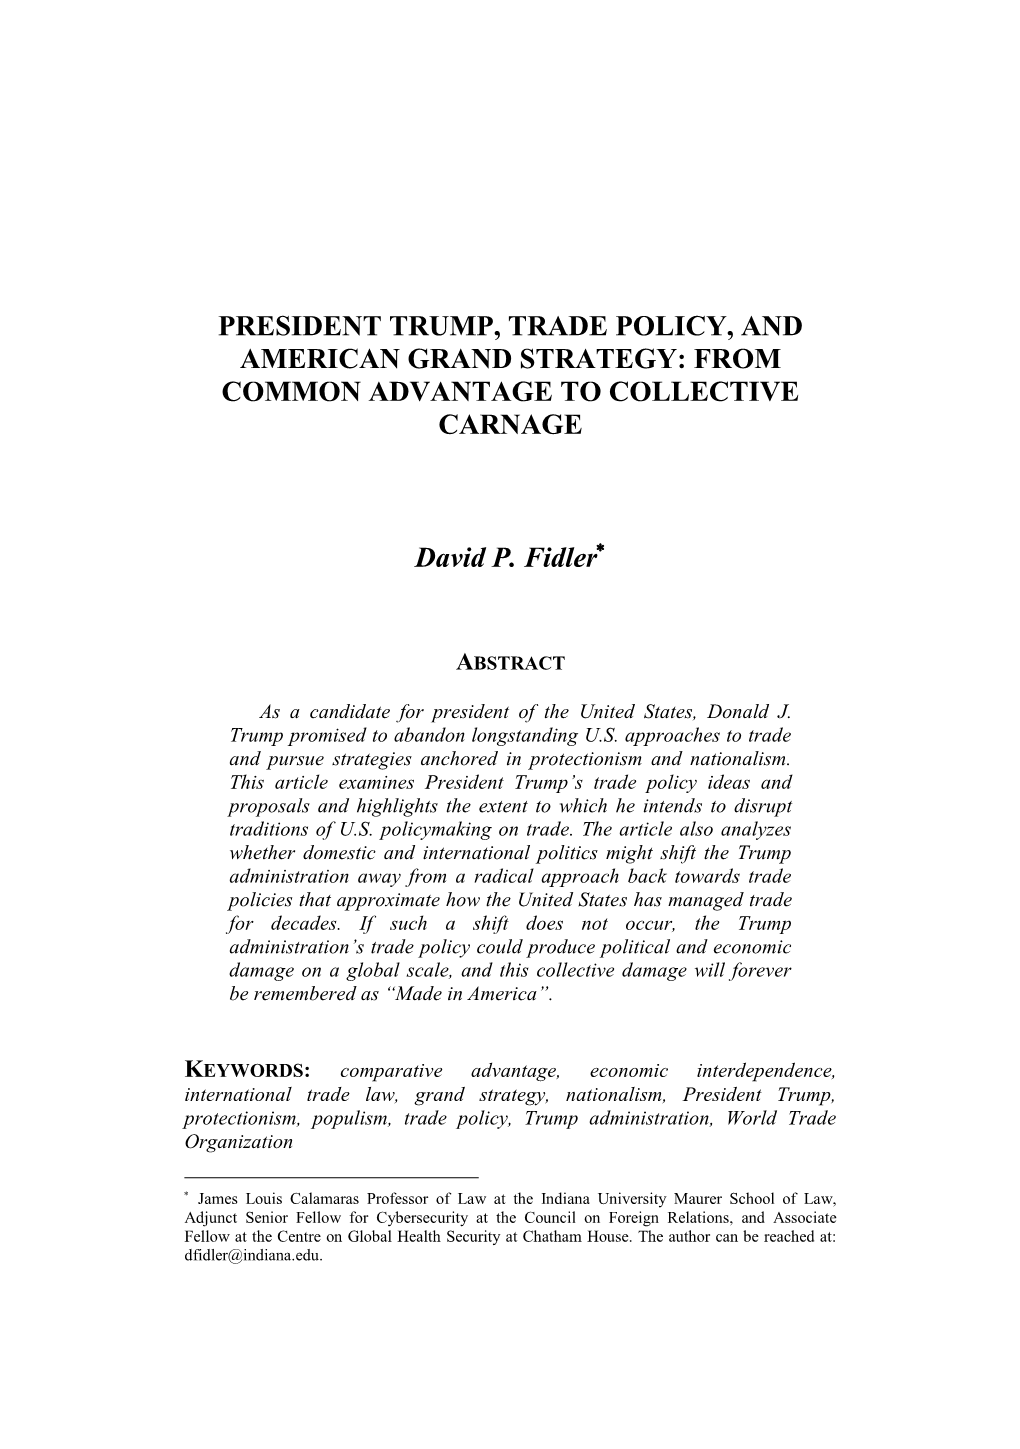 President Trump, Trade Policy, and American Grand Strategy: from Common Advantage to Collective Carnage